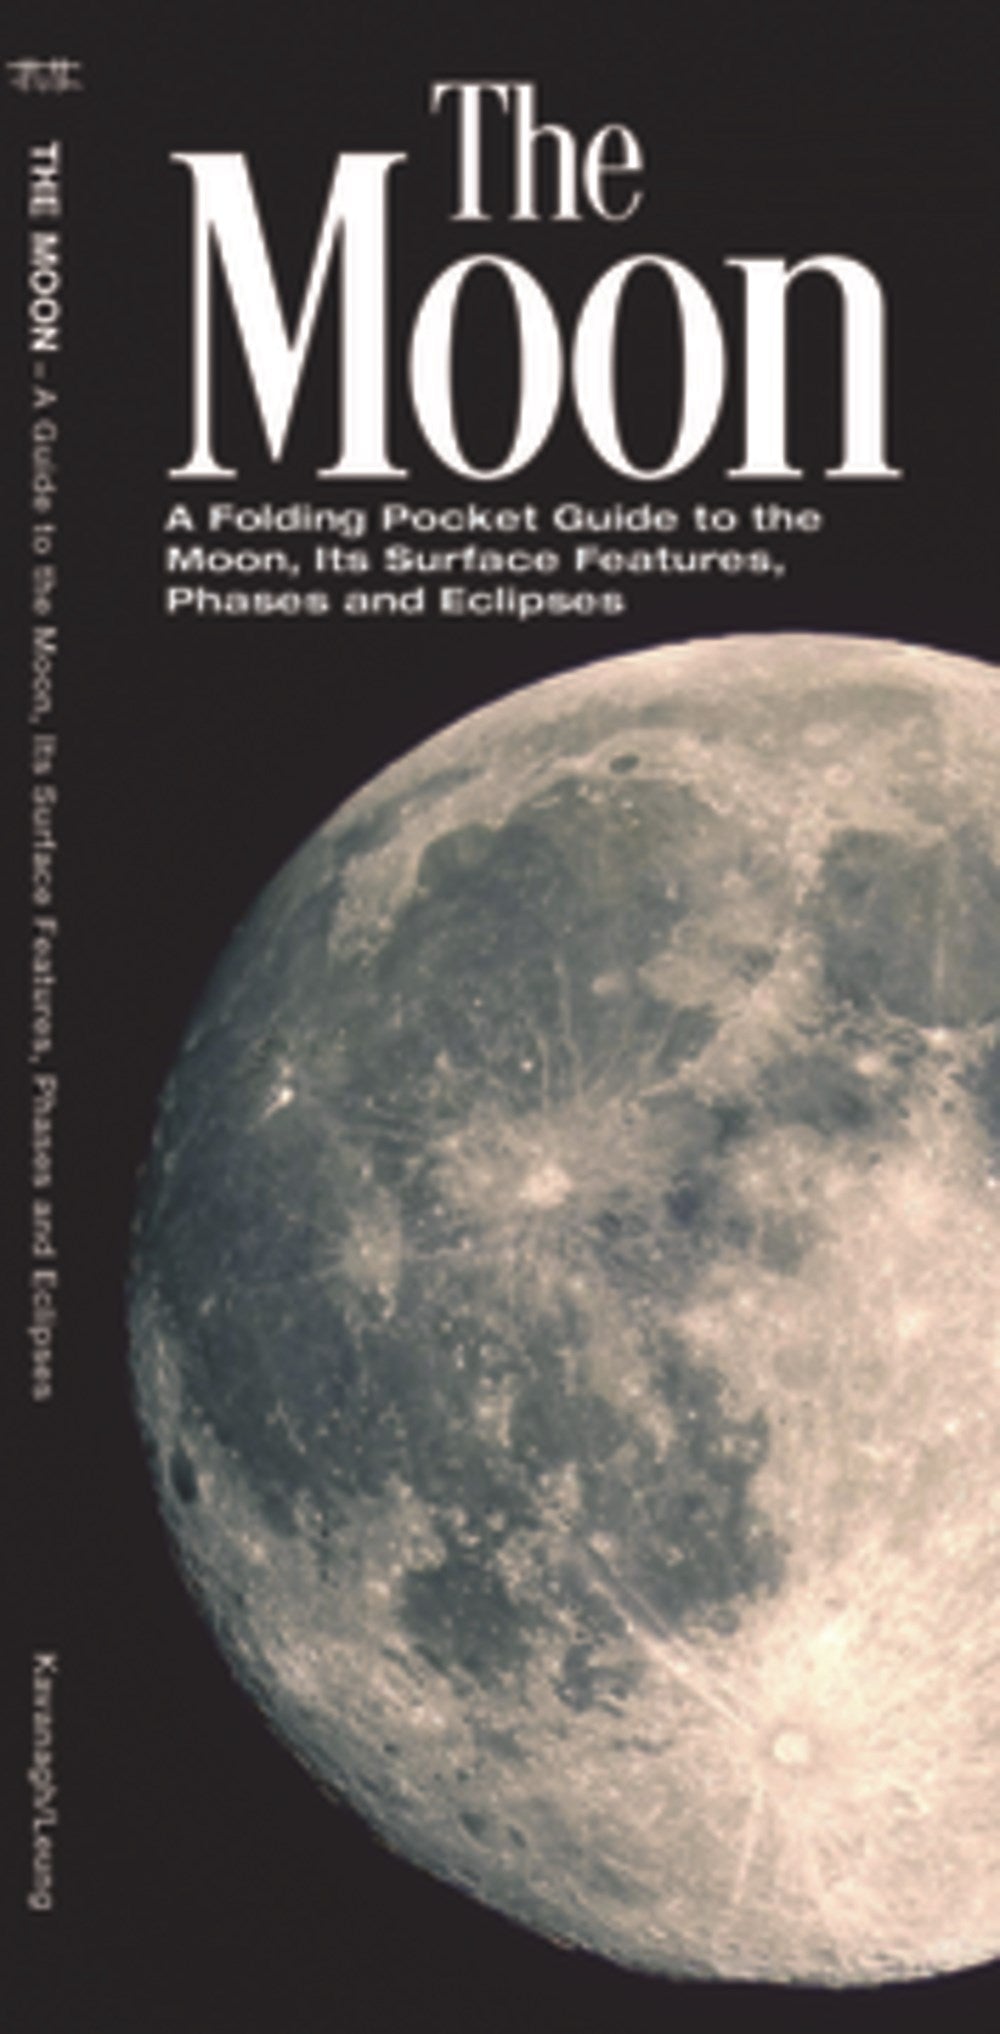 The Moon: A Folding Pocket Guide to the Moon, Its Surface Features, Phases and Eclipses